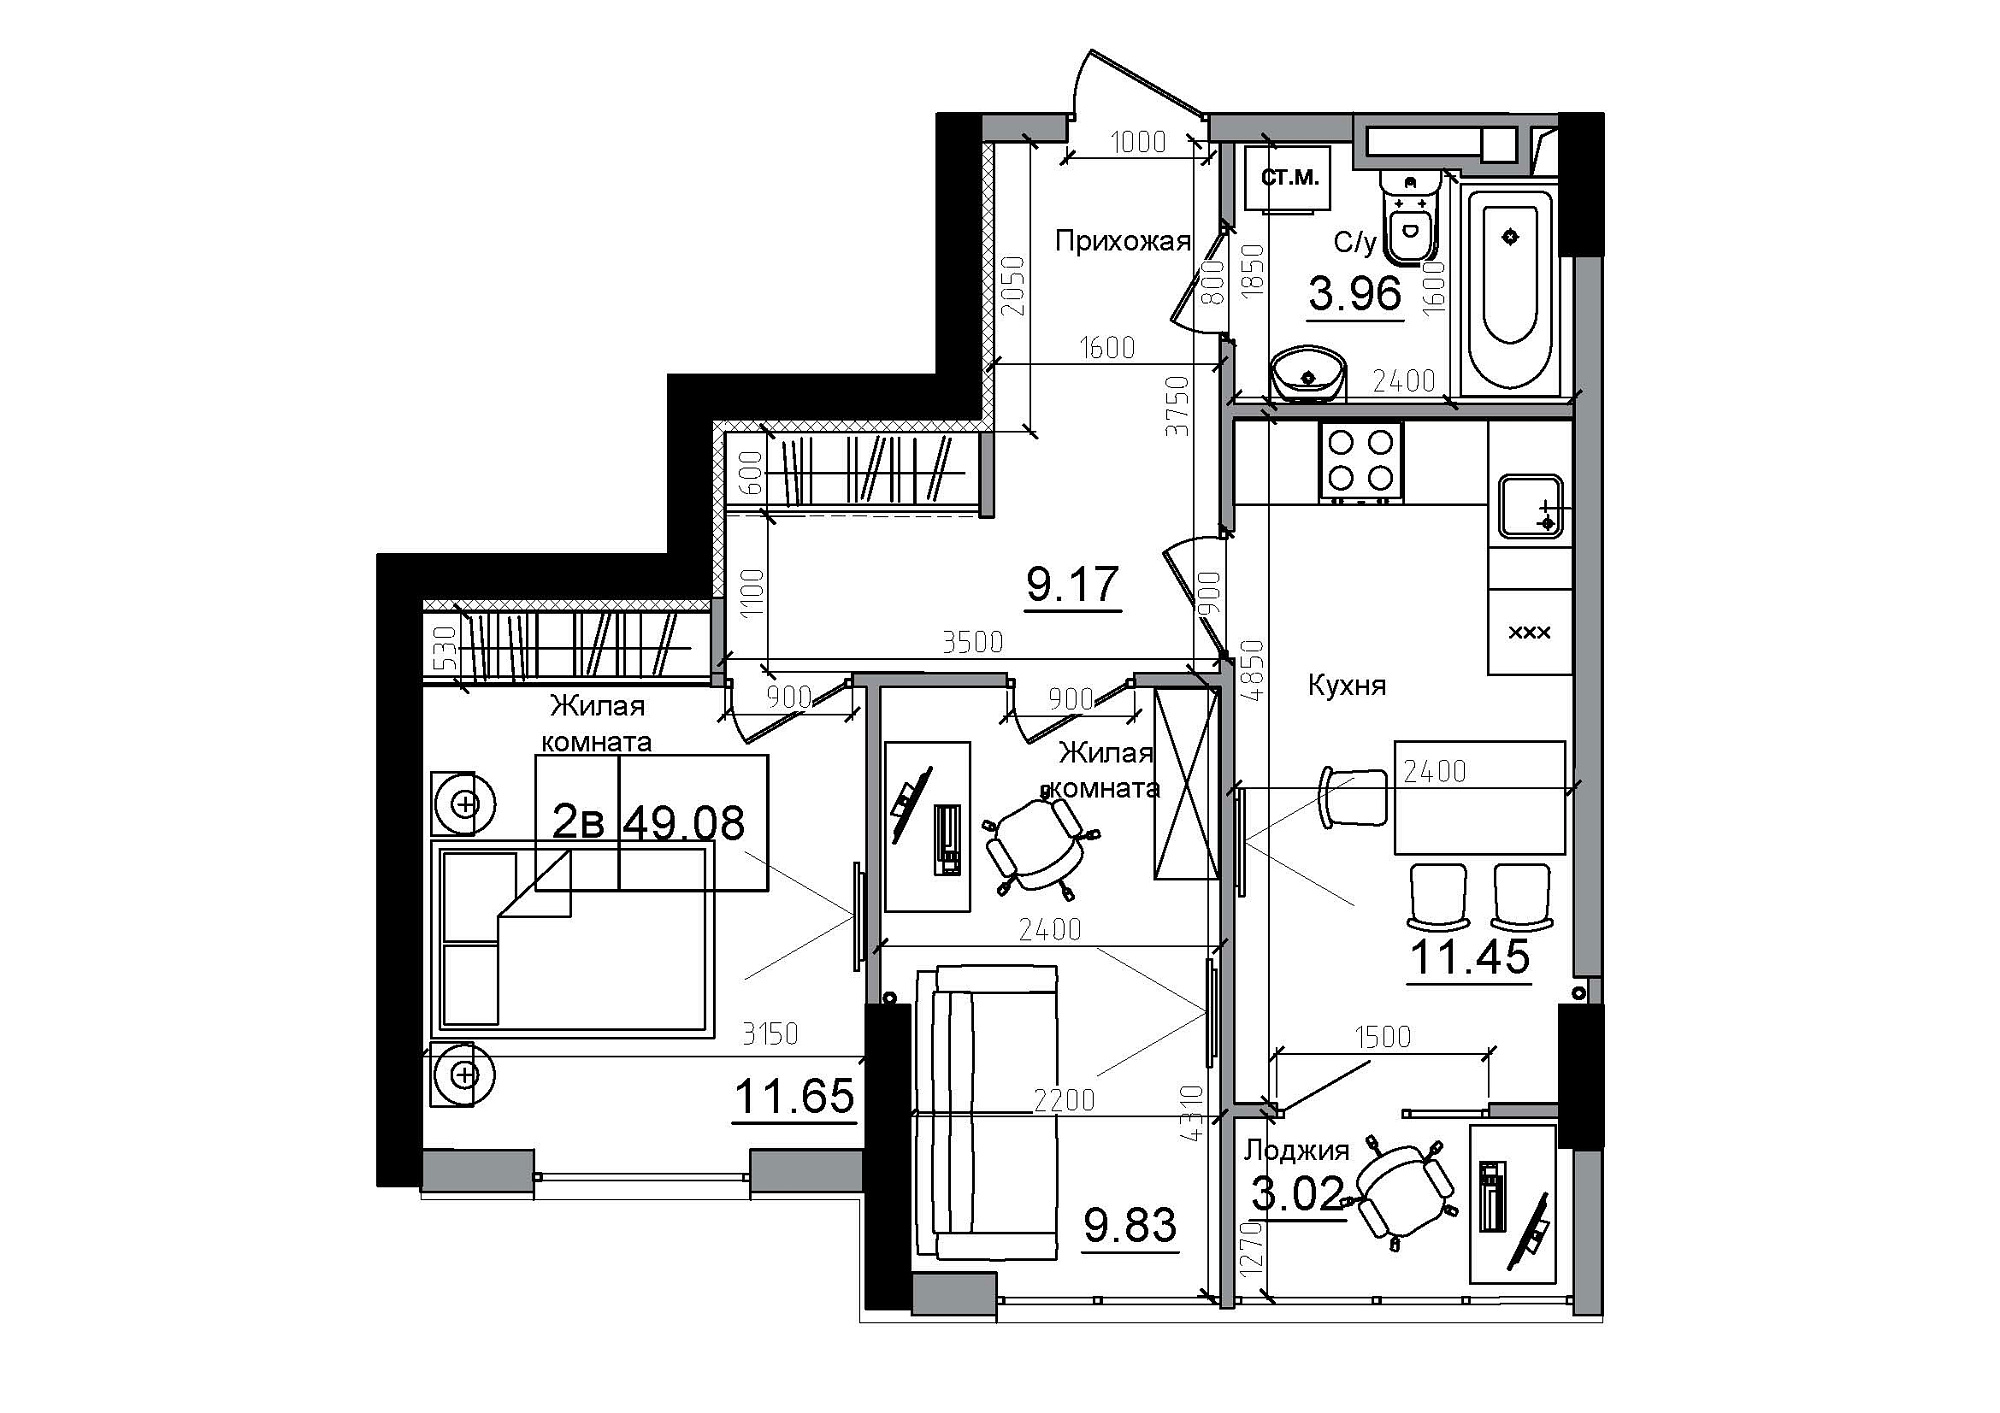 Planning 2-rm flats area 49.08m2, AB-12-01/00015.